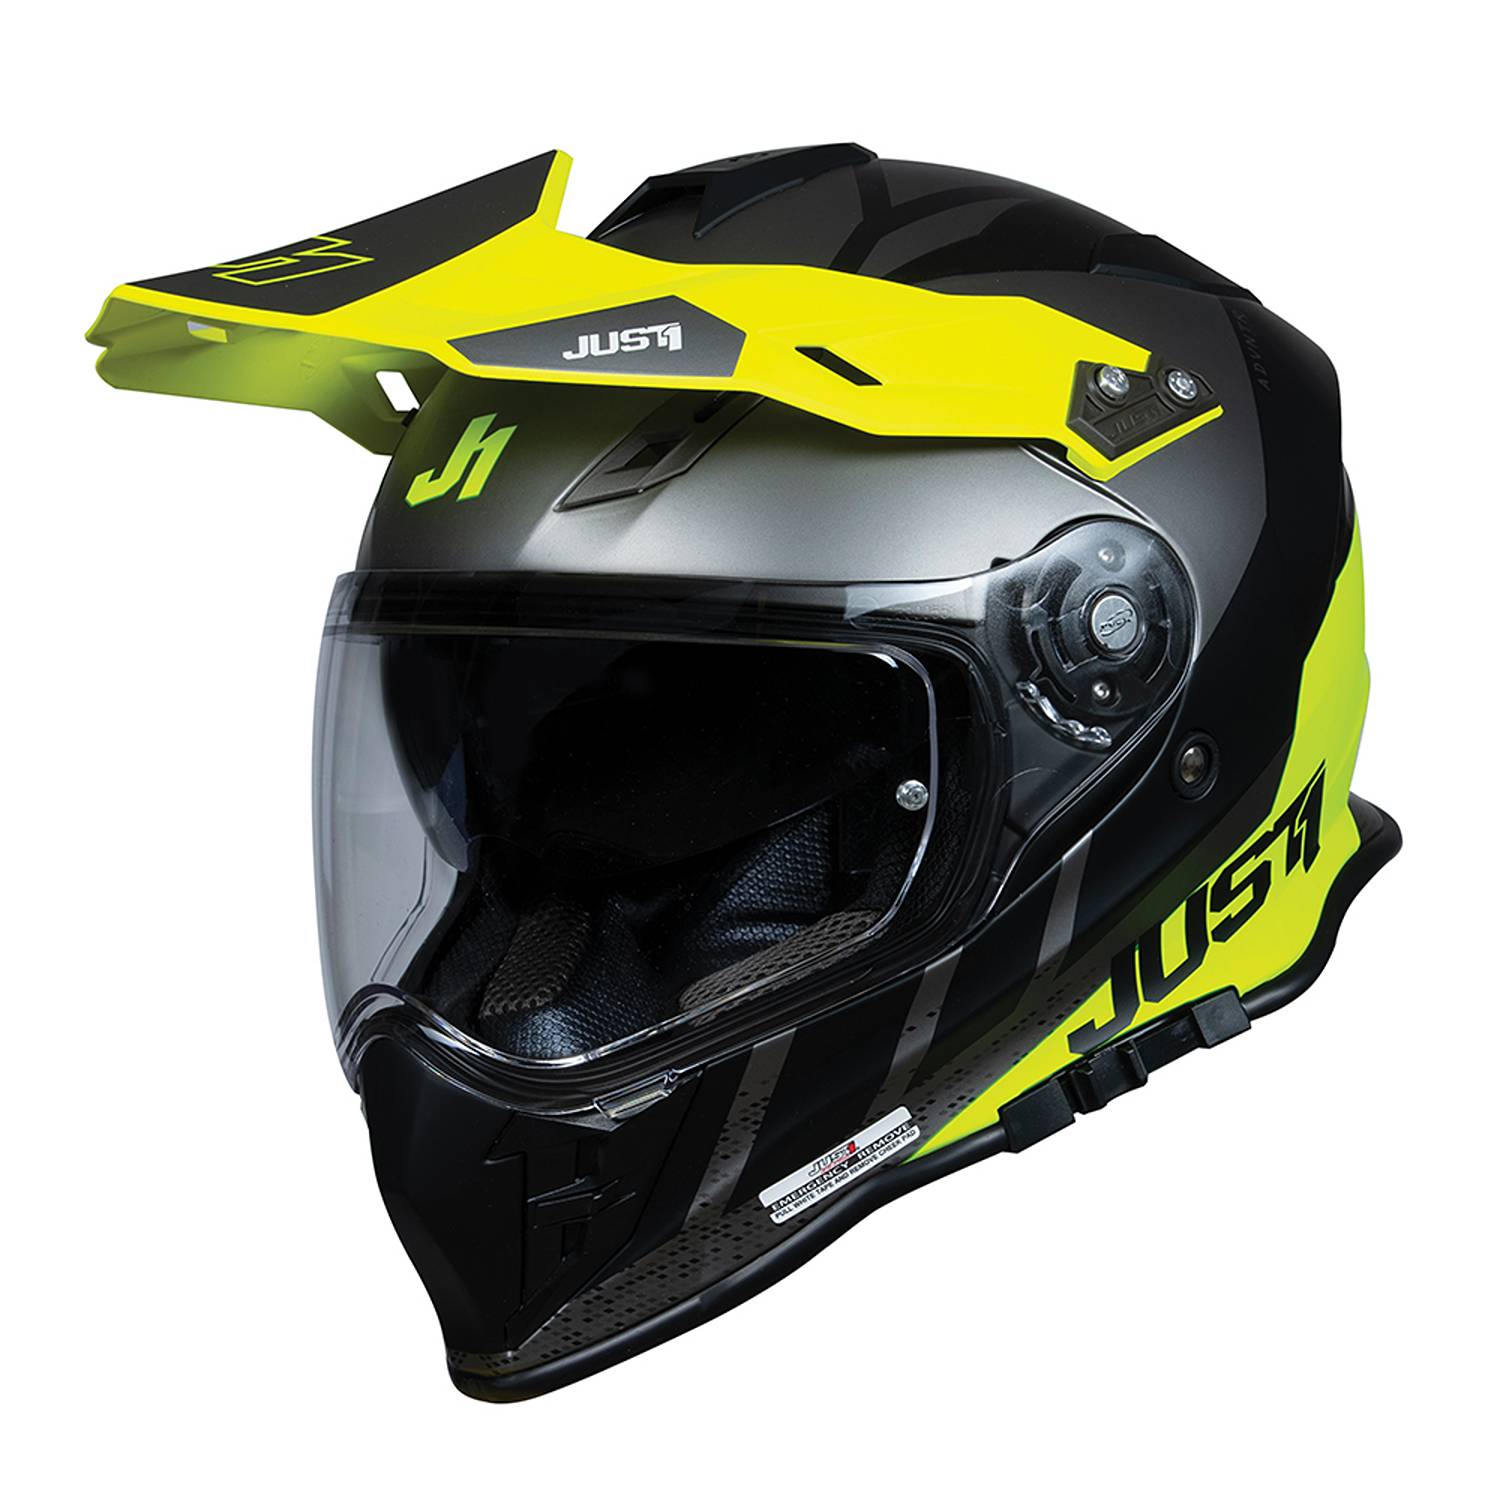 Image of Just1 J34 Pro Outerspace Yellow Fluo Titanium Adventure Helmet Size M ID 8055774027946